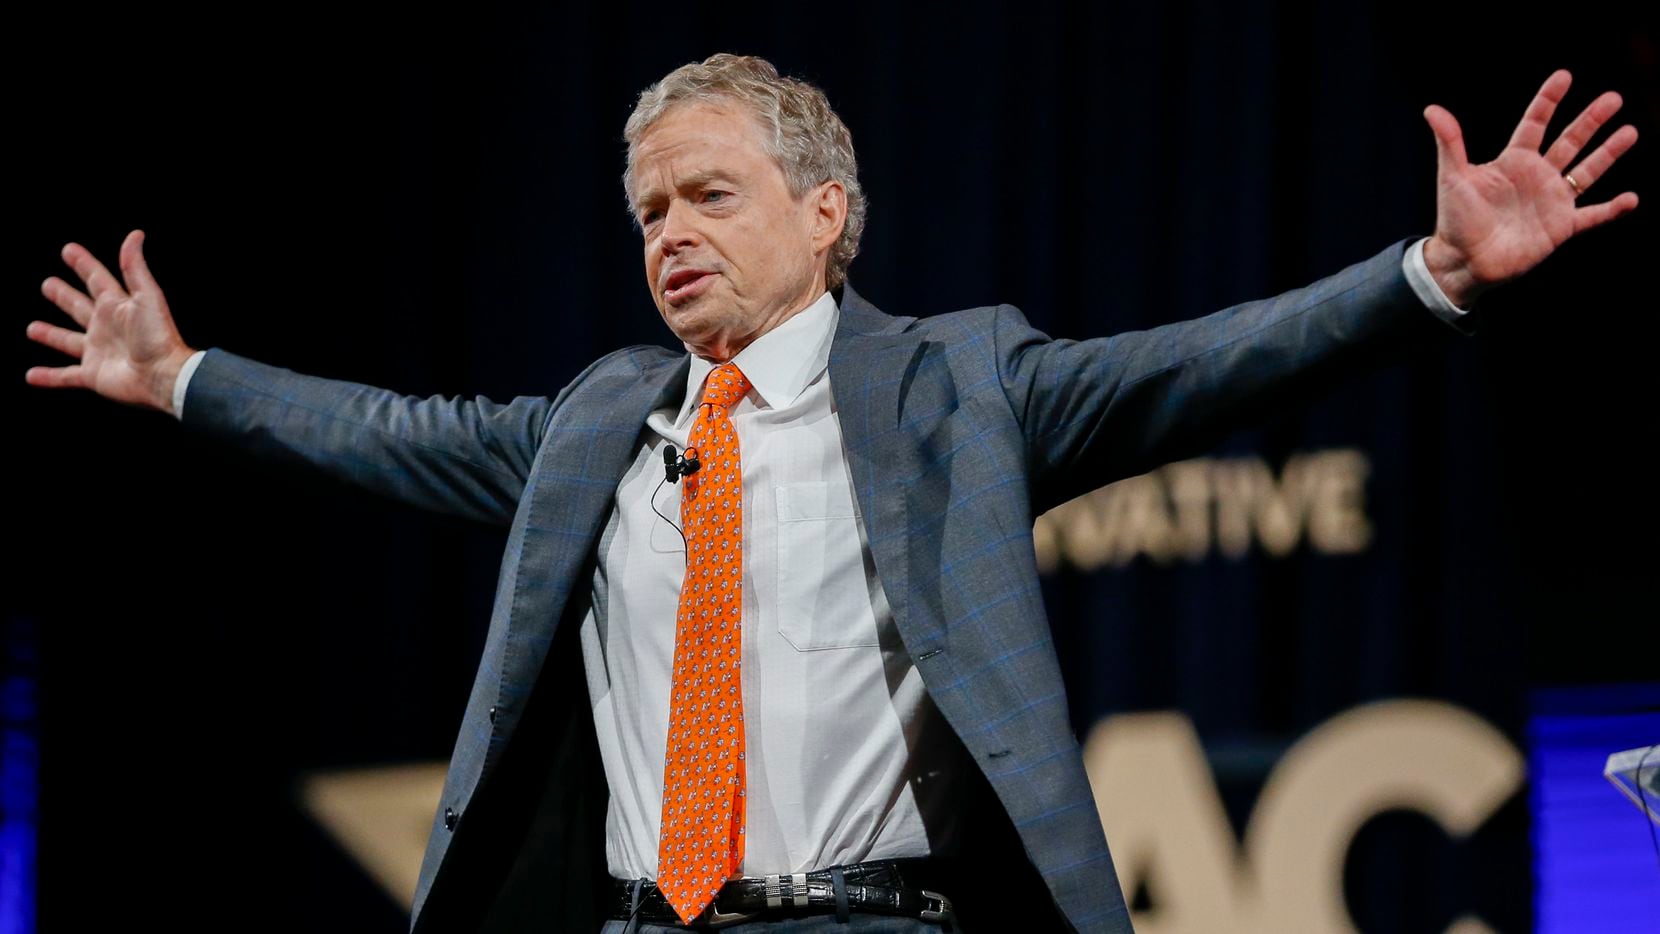 Former Texas state Sen. Don Huffines waves to the crowd after speaking at the Conservative...